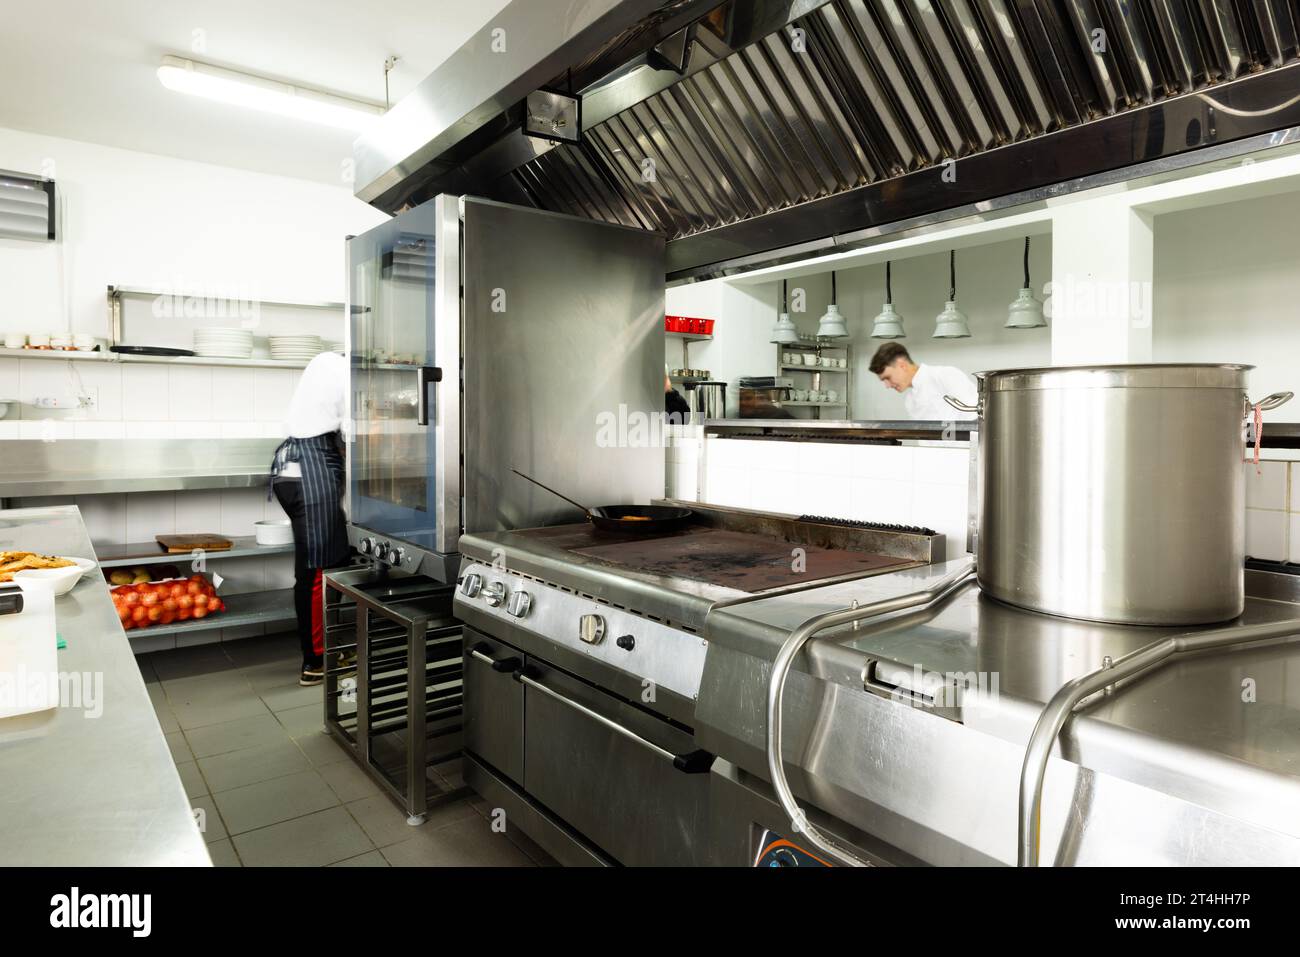 Interior of commercial kitchen with various modern appliances and utensils Stock Photo